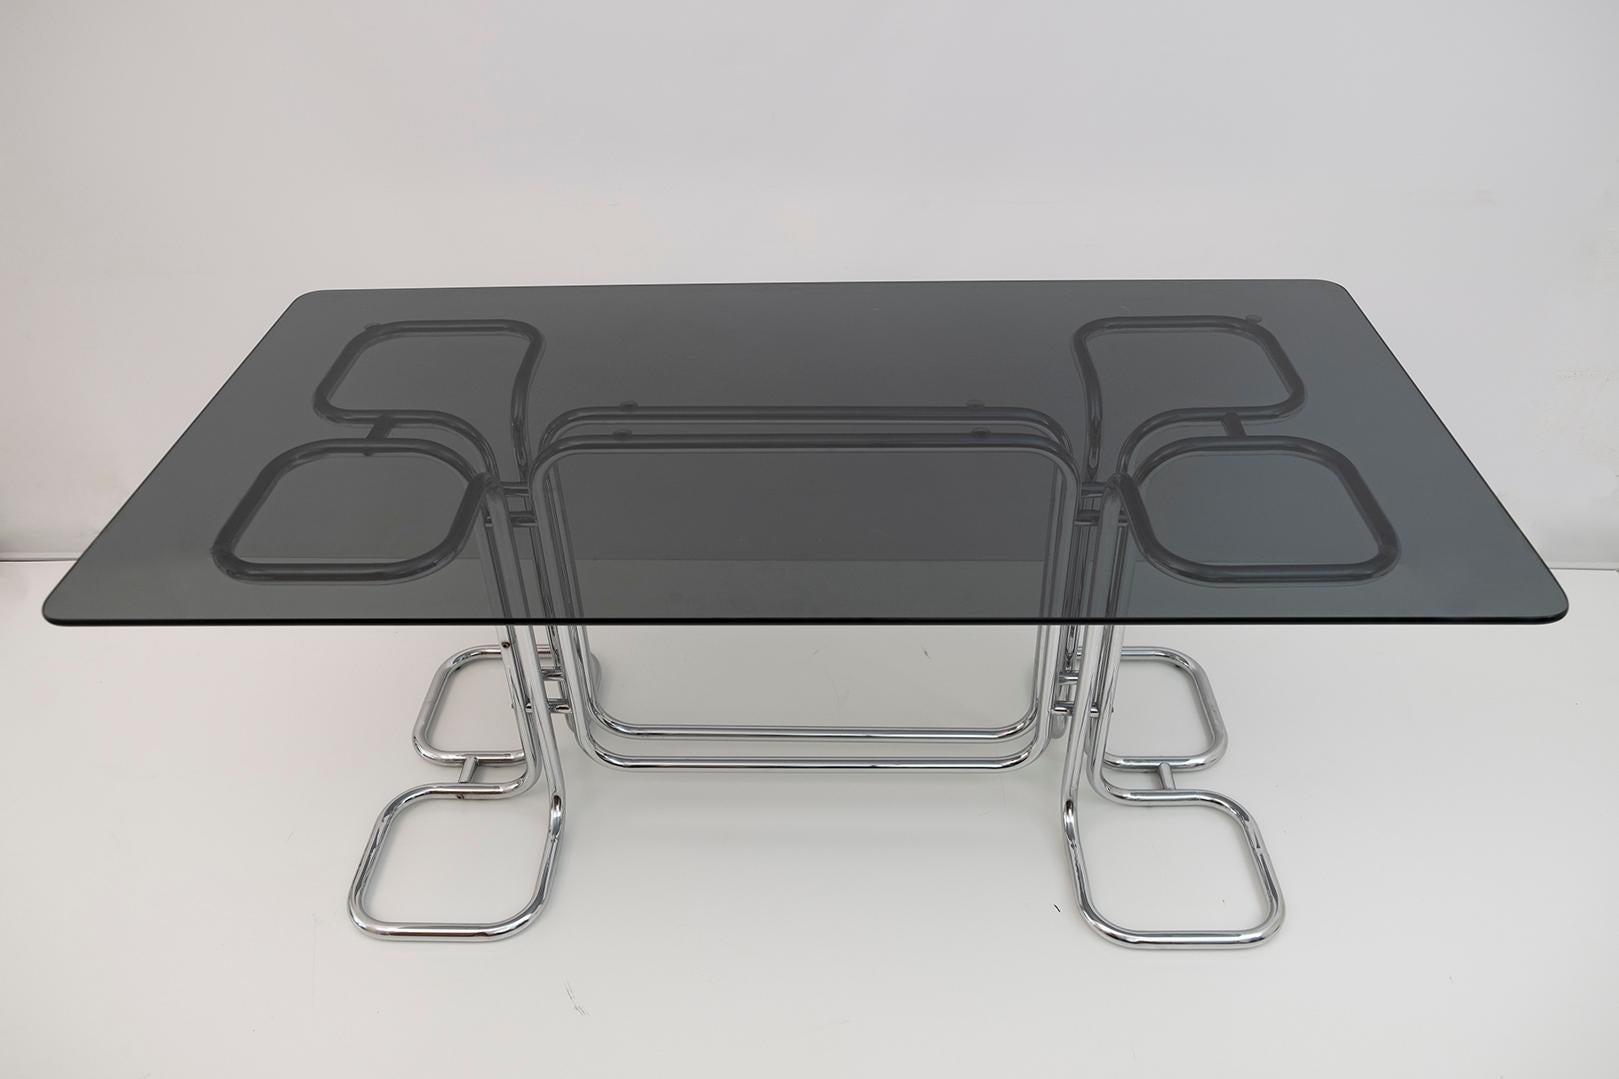 Rectangular dining table with mid-century chrome base and smoked glass top. This wonderful dining table was designed by Giotto Stoppino in Italy in the 1970s.

This extraordinary piece is unique in that its complex lines are built by merging only